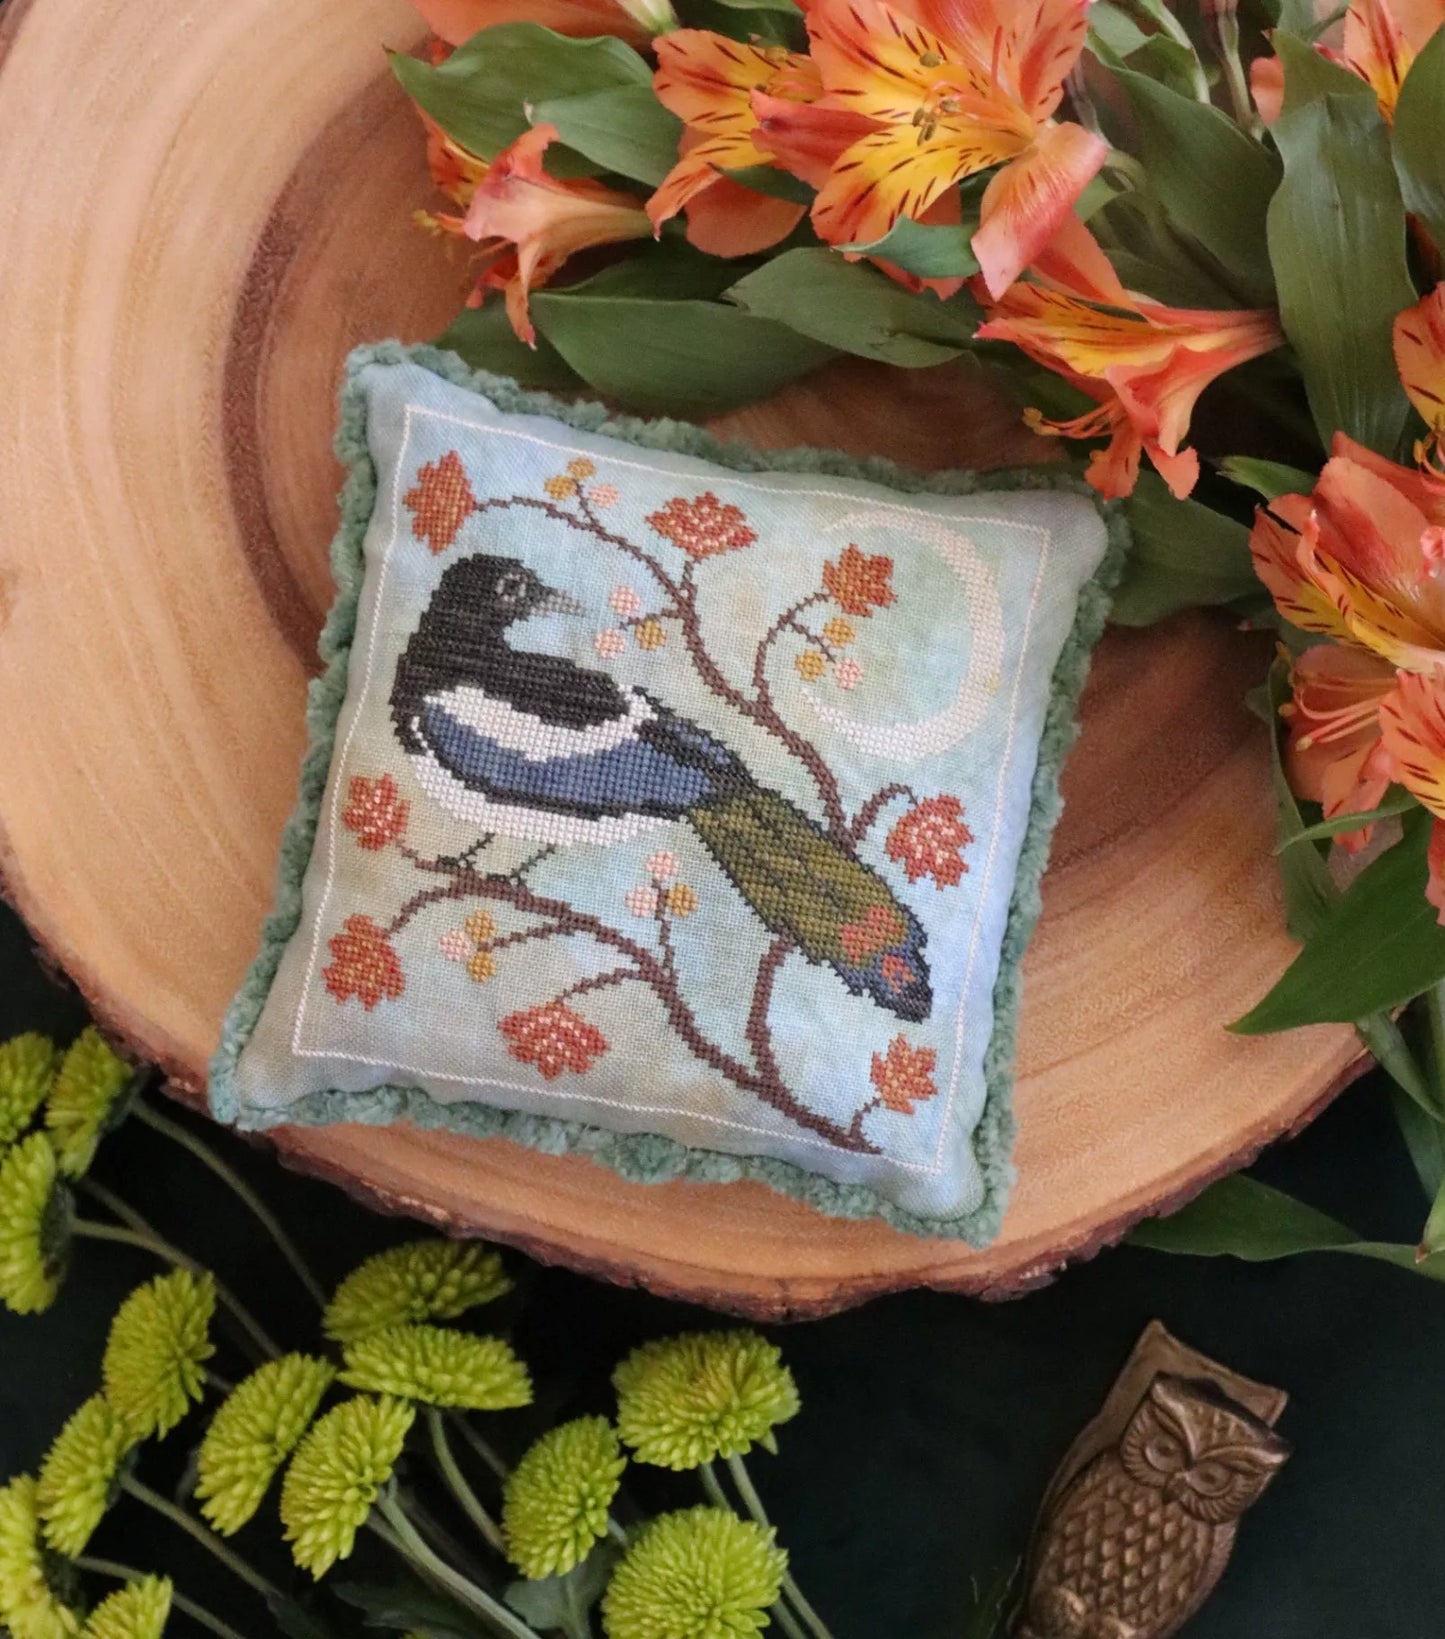 Magpie and The Moon - The Blue Flower - Cross Stitch Pattern, Needlecraft Patterns, Needlecraft Patterns, The Crafty Grimalkin - A Cross Stitch Store